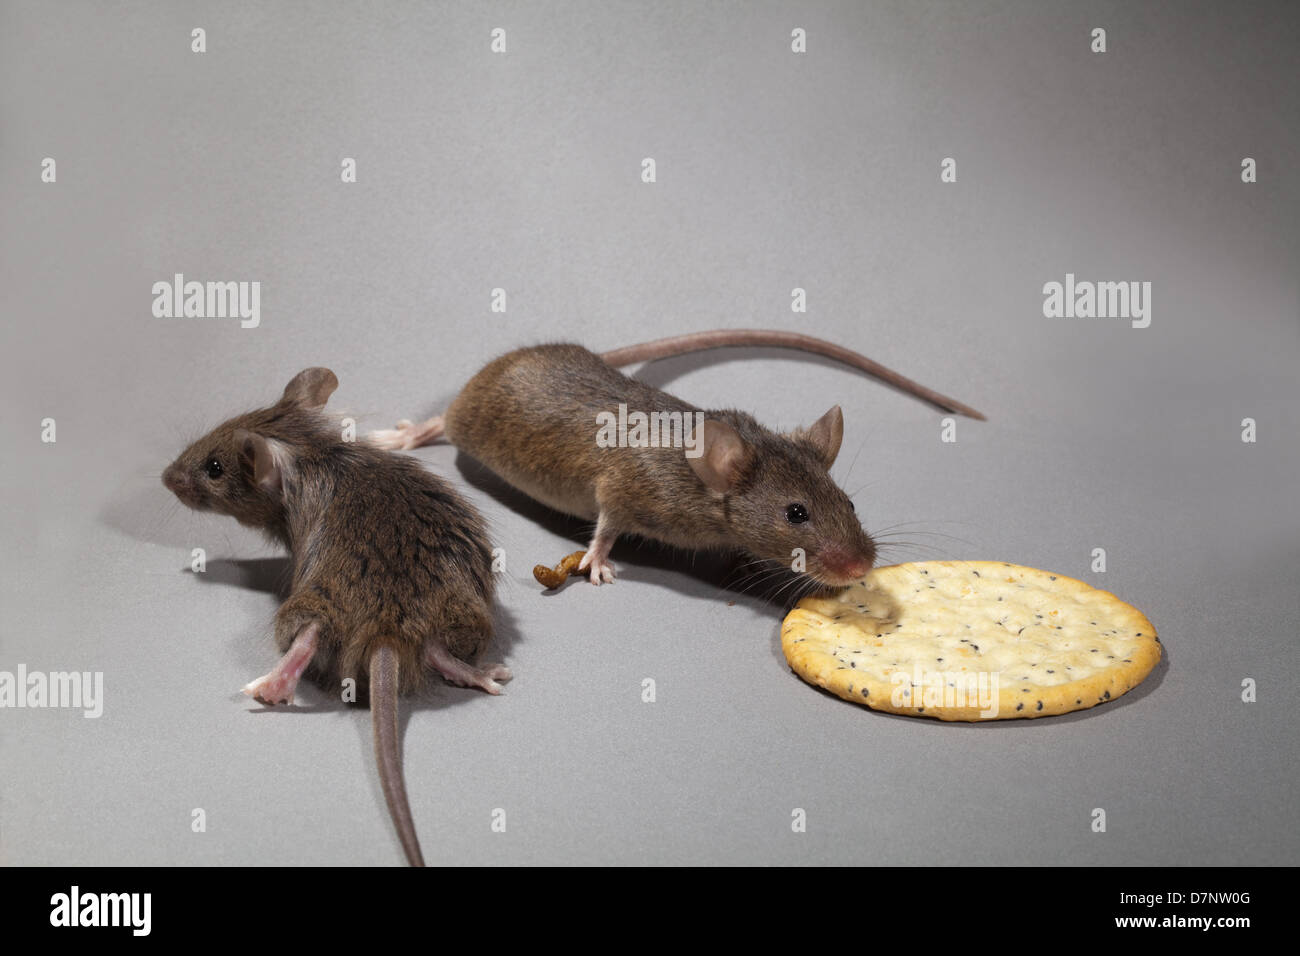 House Mouse Mus musculus Stock Photo